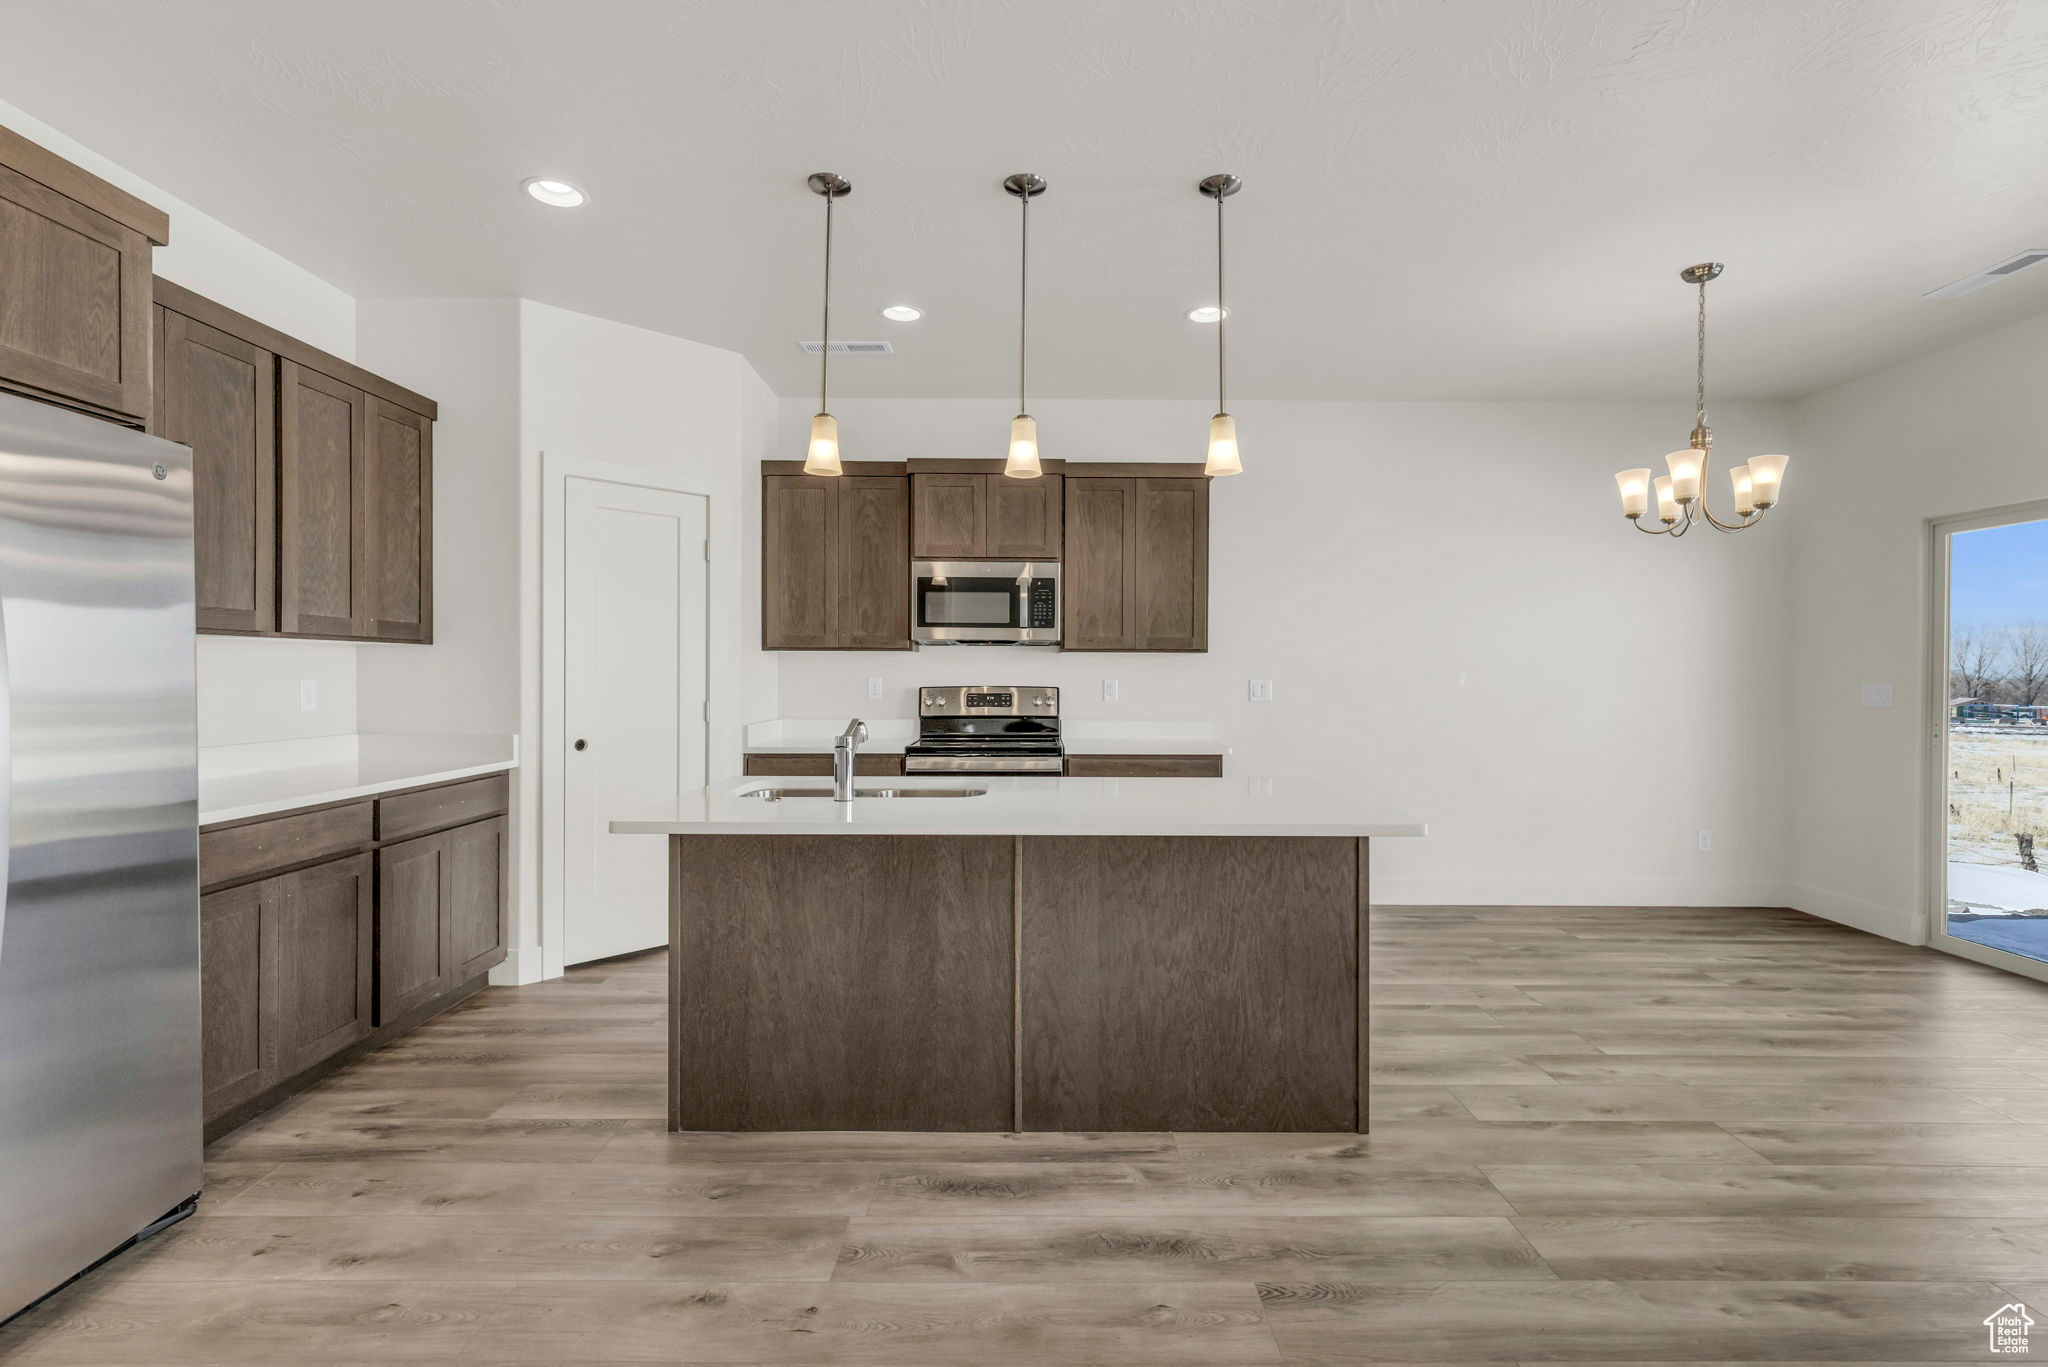 Kitchen featuring light hardwood / wood-style flooring, dark brown cabinets, a notable chandelier, decorative light fixtures, and appliances with stainless steel finishes